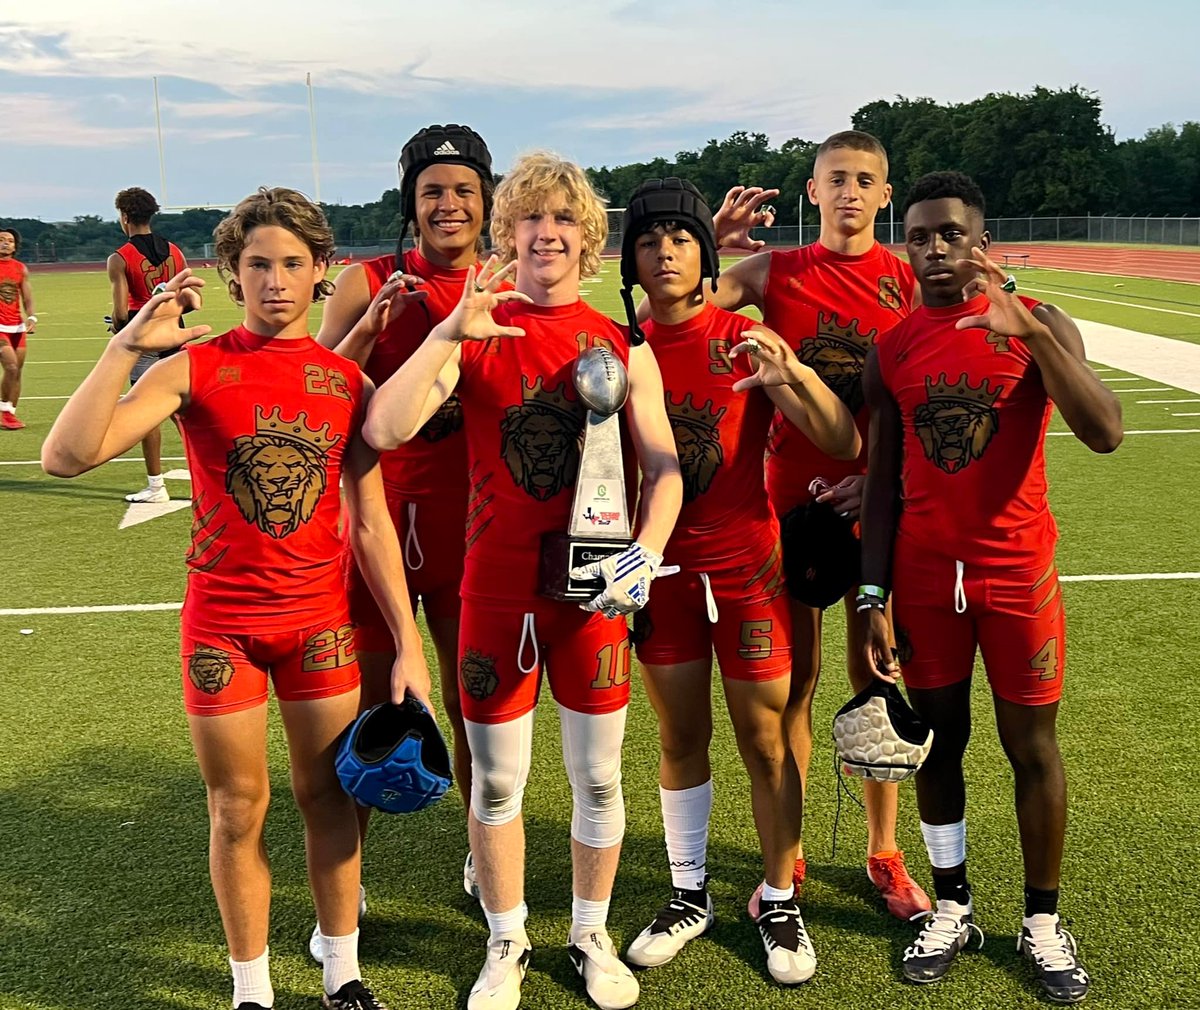 Me & My @DFWPrideFB Brothers Getting it Done w/ the 🥇
See you soon @PremierEventsU2 
@DentonGuyer_FB @MagAthletic @NTXHSFB #Southside #TheCoalition #Navajoboys